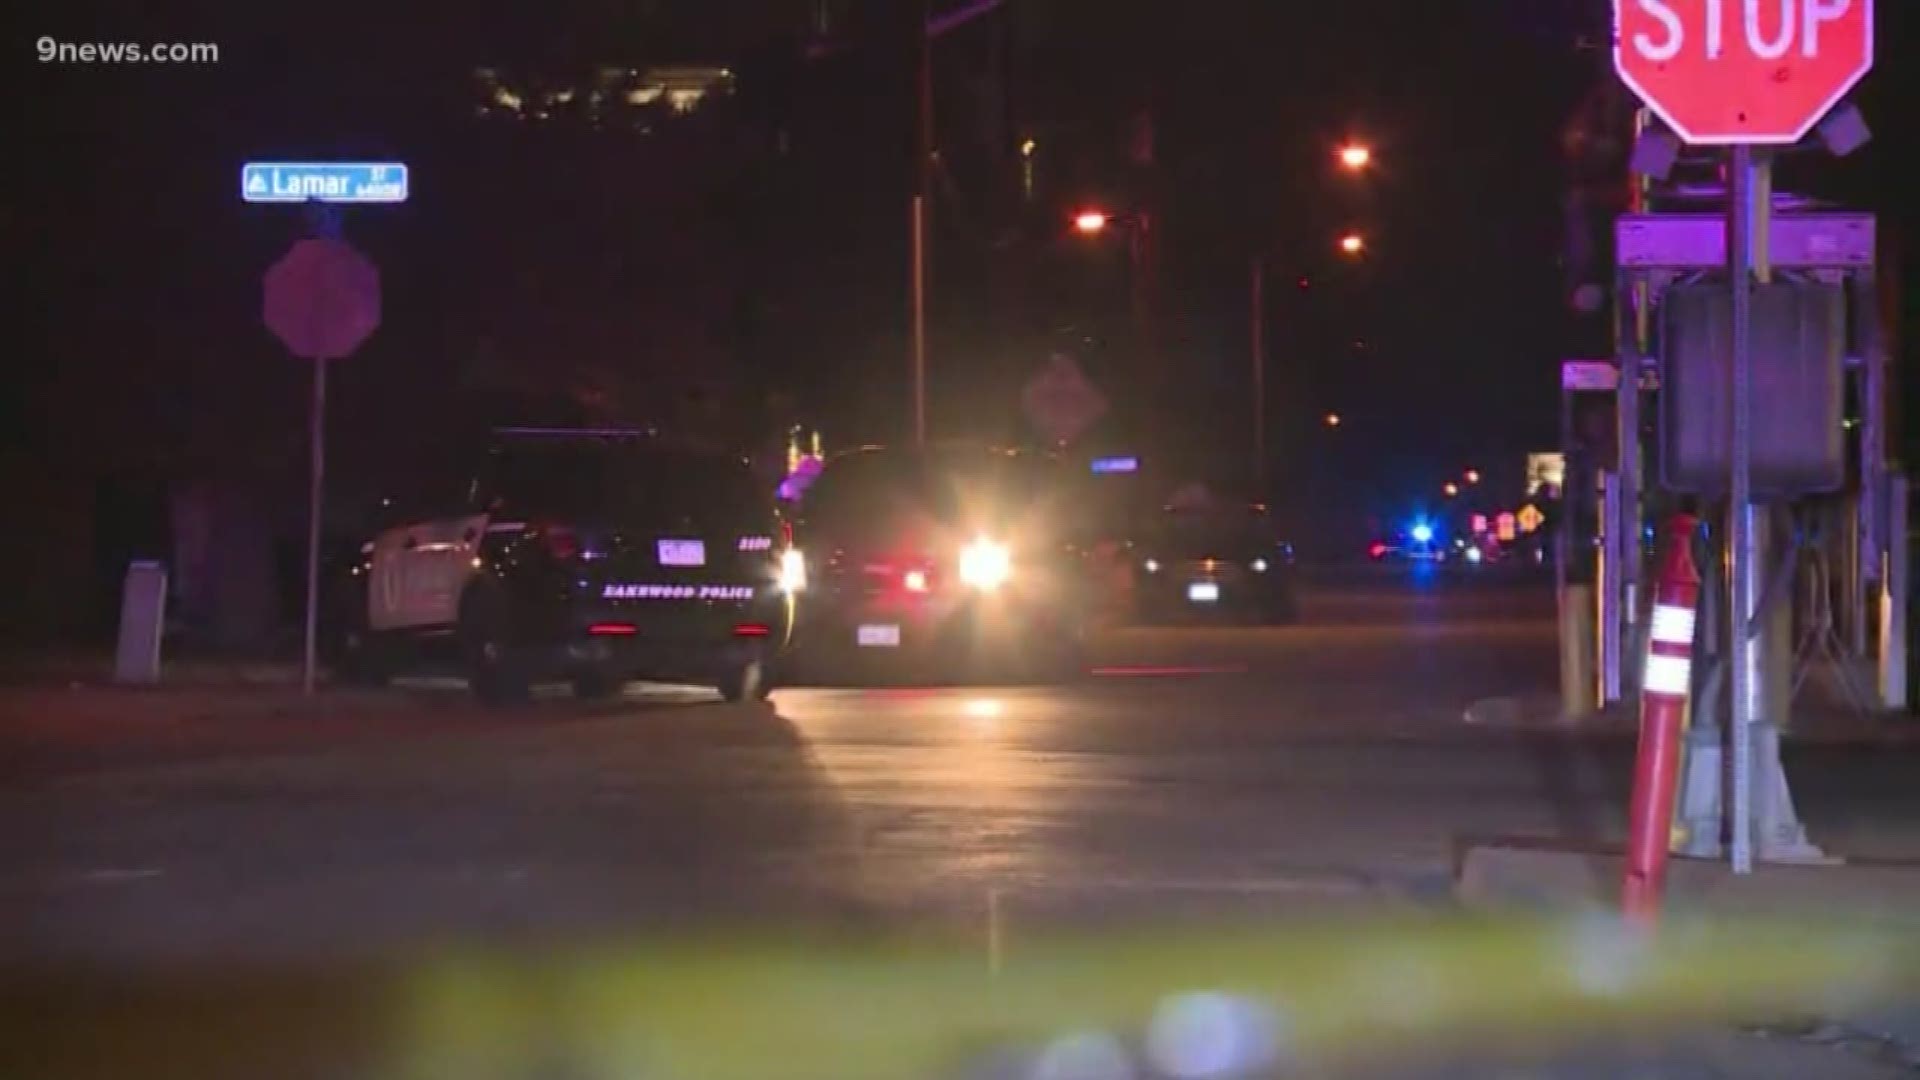 Police said the shooting stemmed from a fight in the street near West 13th Avenue and North Lamar Street.